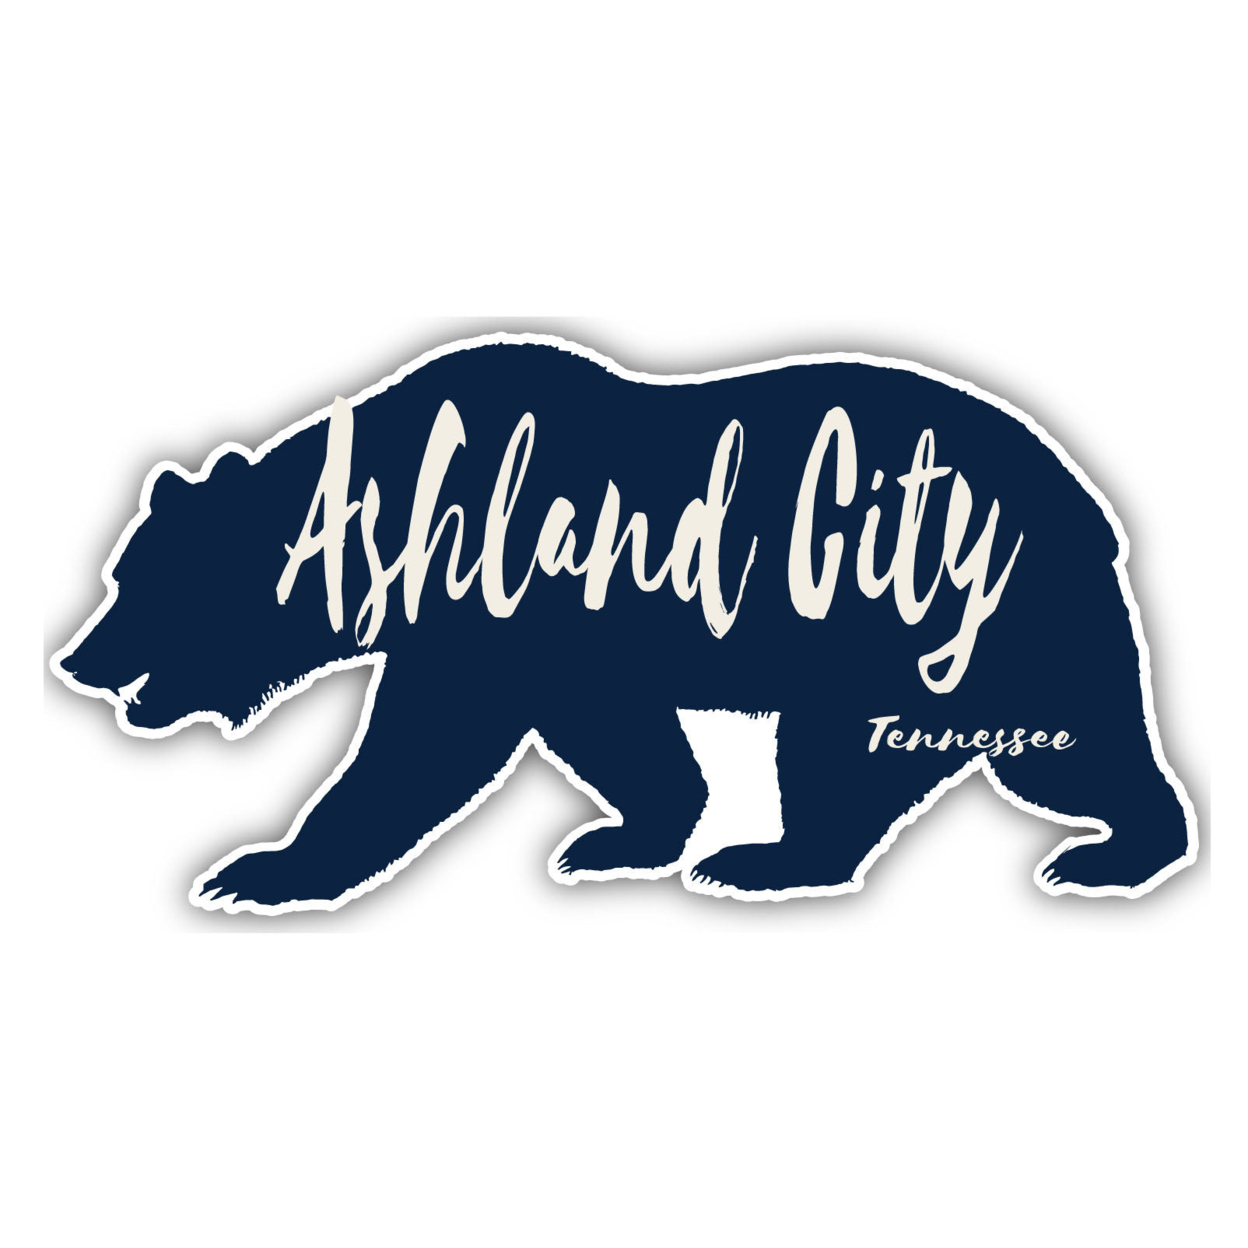 Ashland City Tennessee Souvenir Decorative Stickers (Choose Theme And Size) - 4-Pack, 8-Inch, Bear